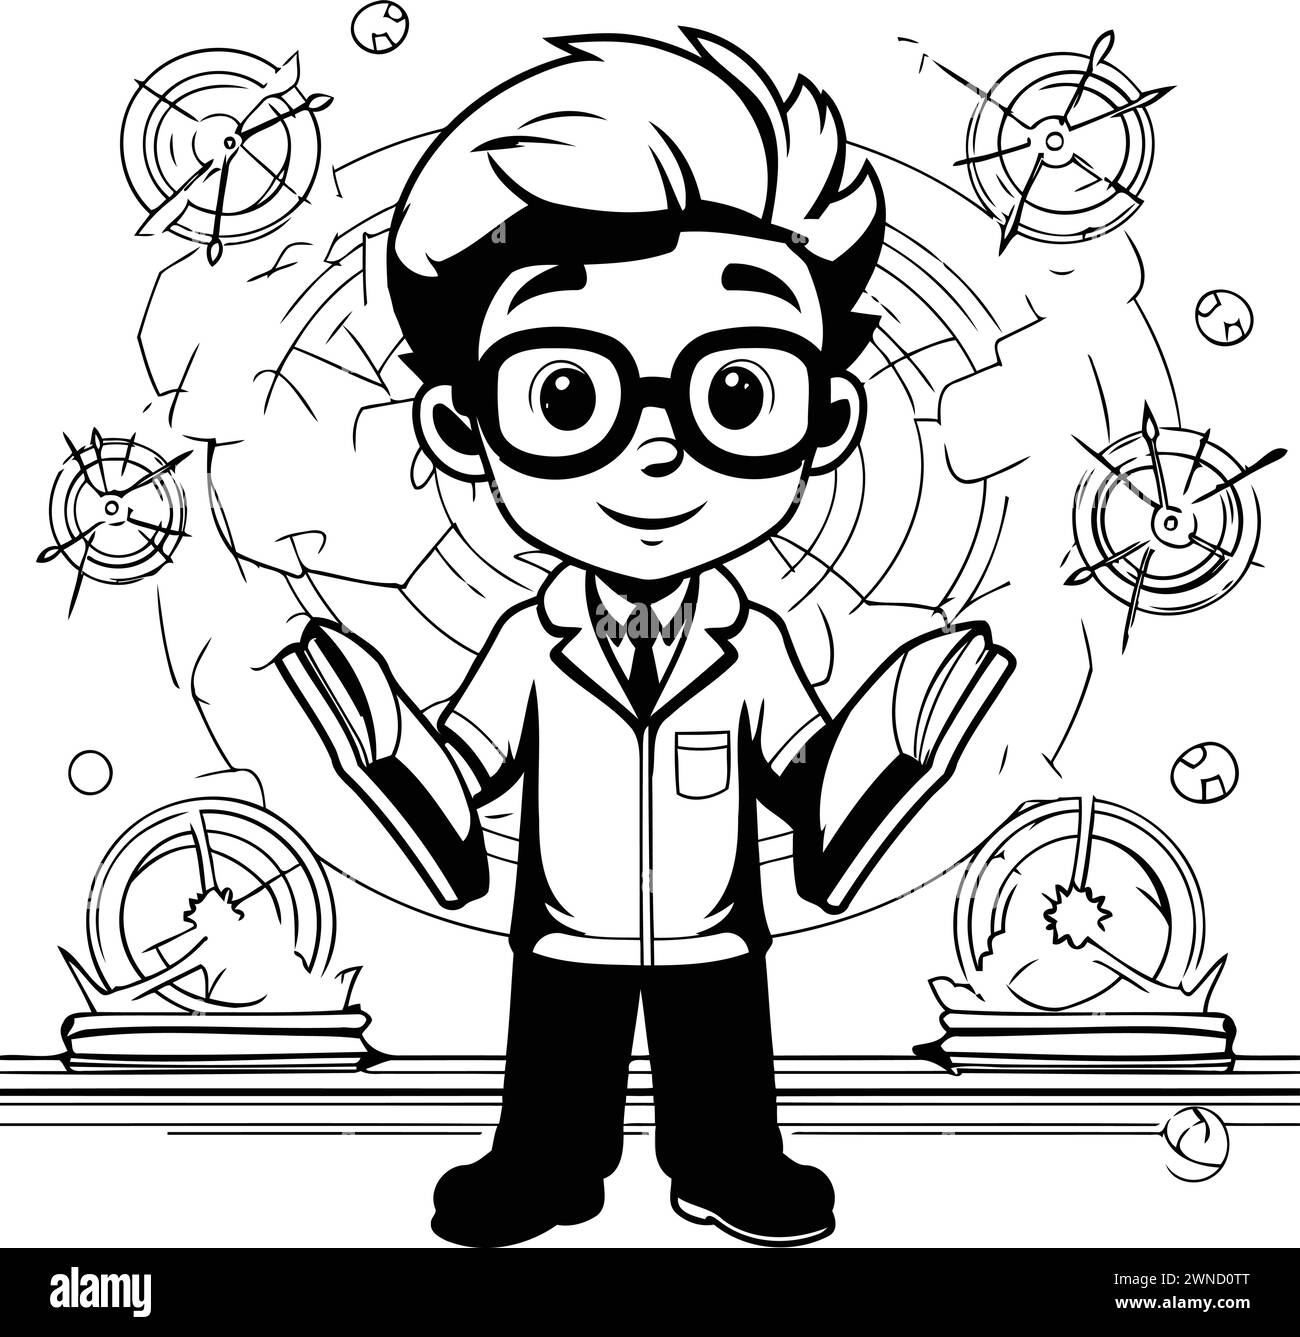 Schoolboy holding a book. Black and white vector illustration for coloring book. Stock Vector